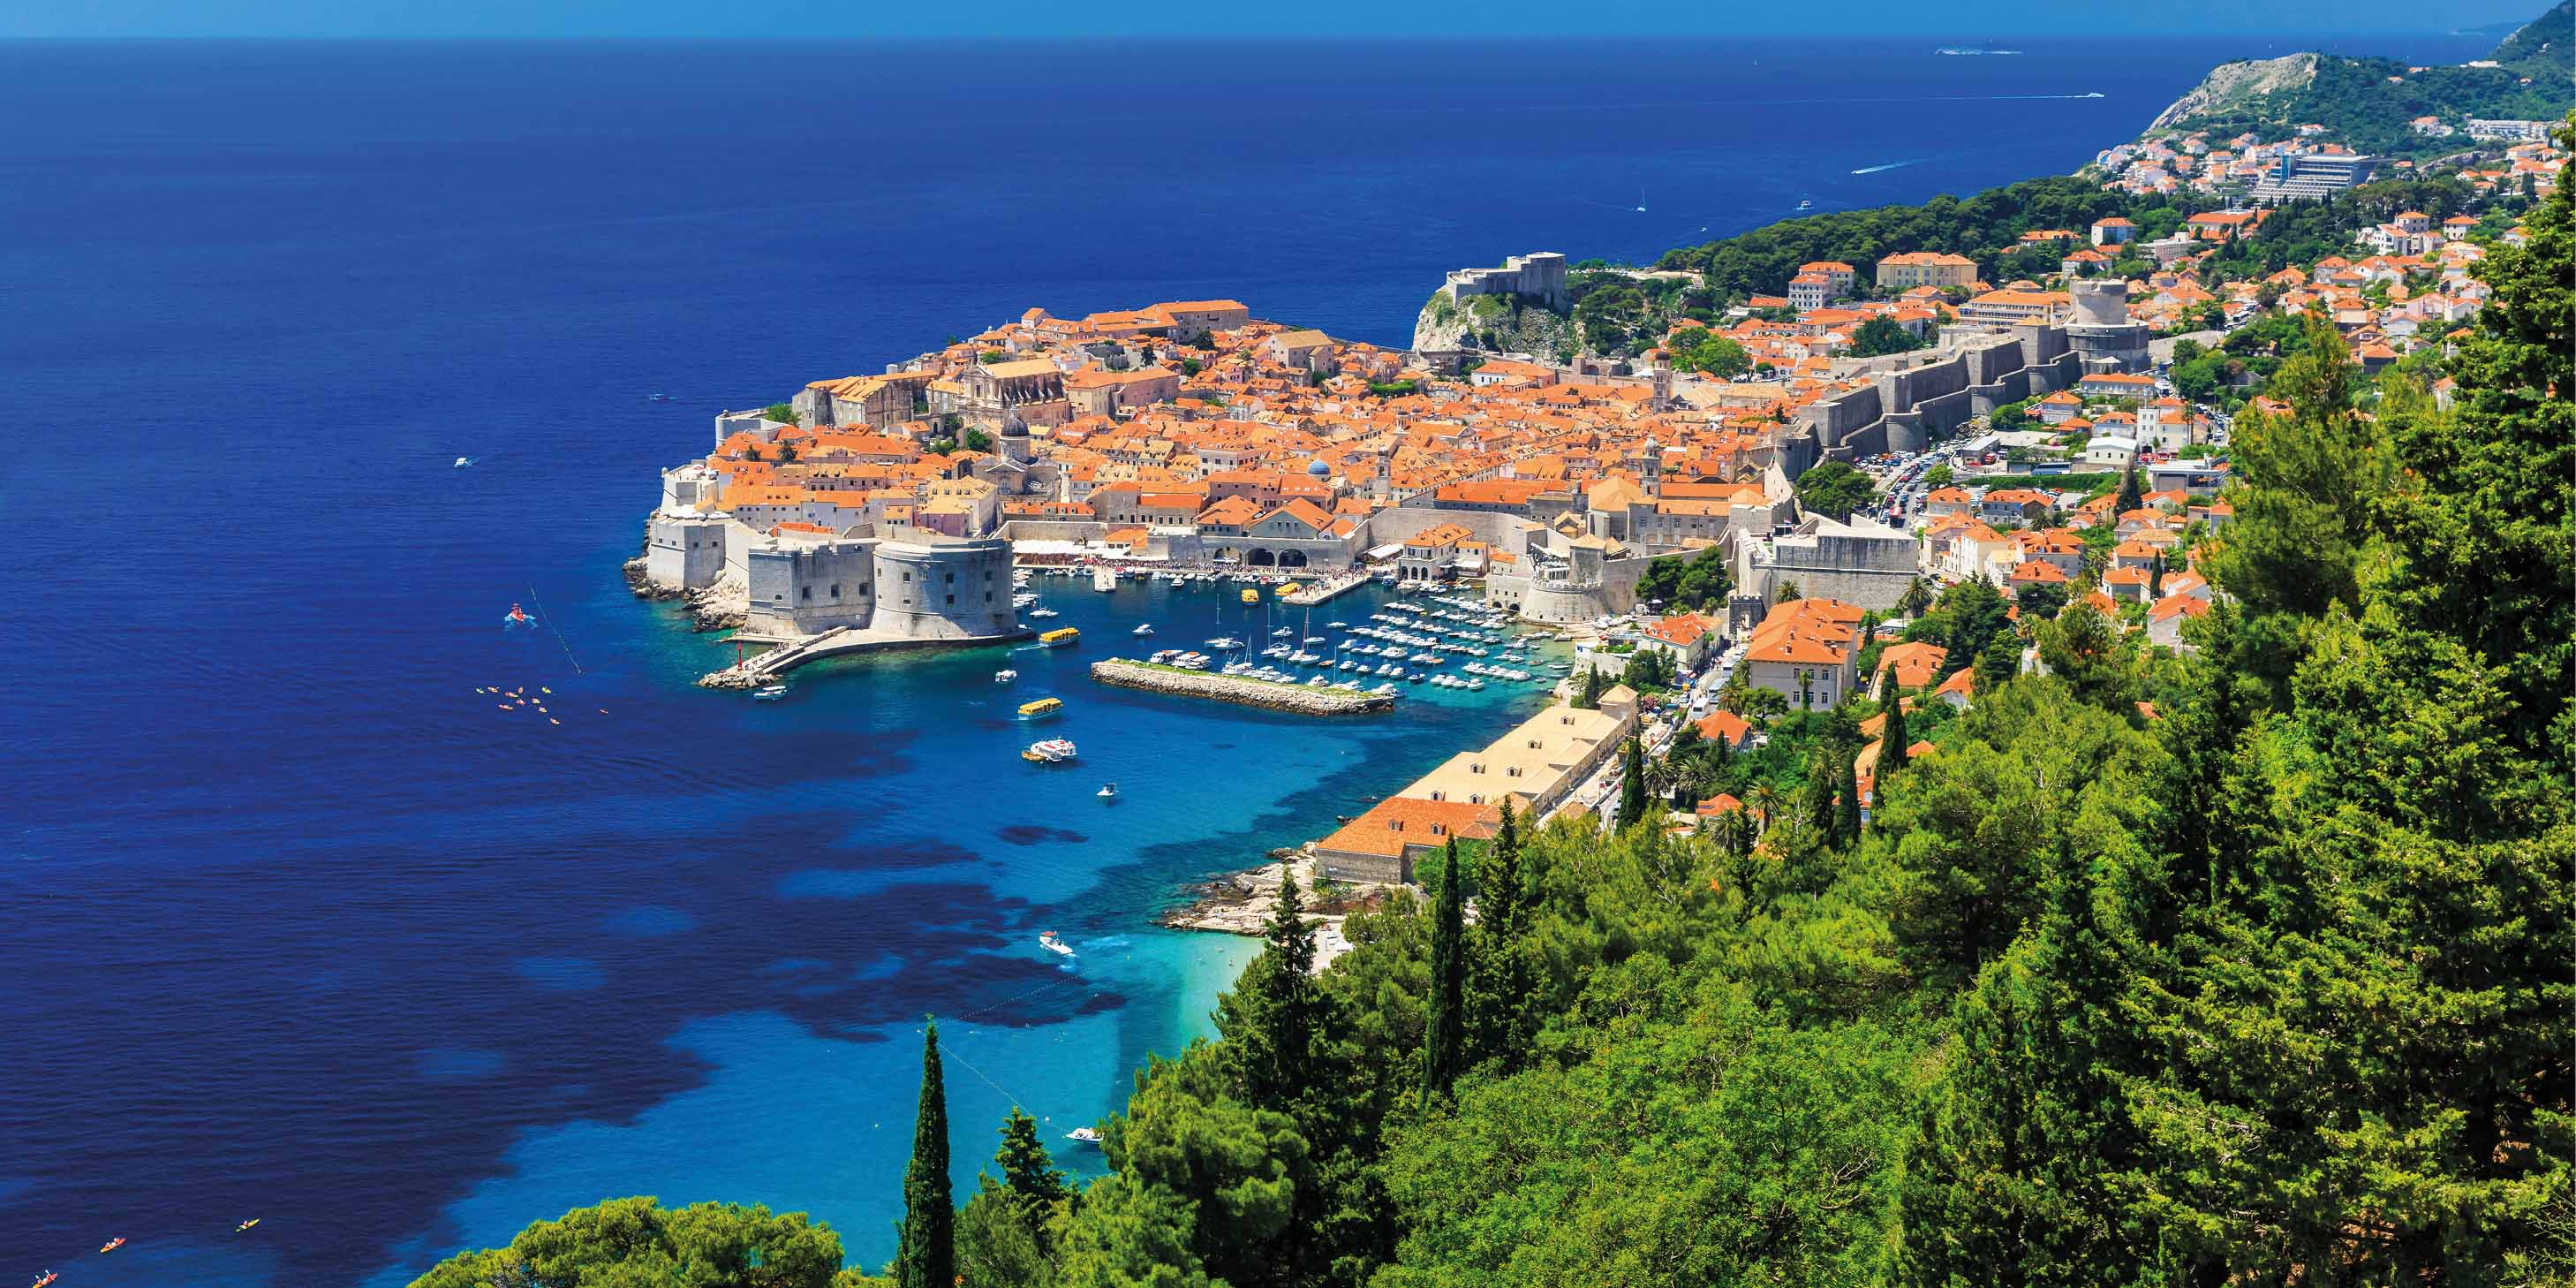 The coast of Dubrovnik, Croatia on a sunny day, the blue sky and blue sea in contrast to the green land above